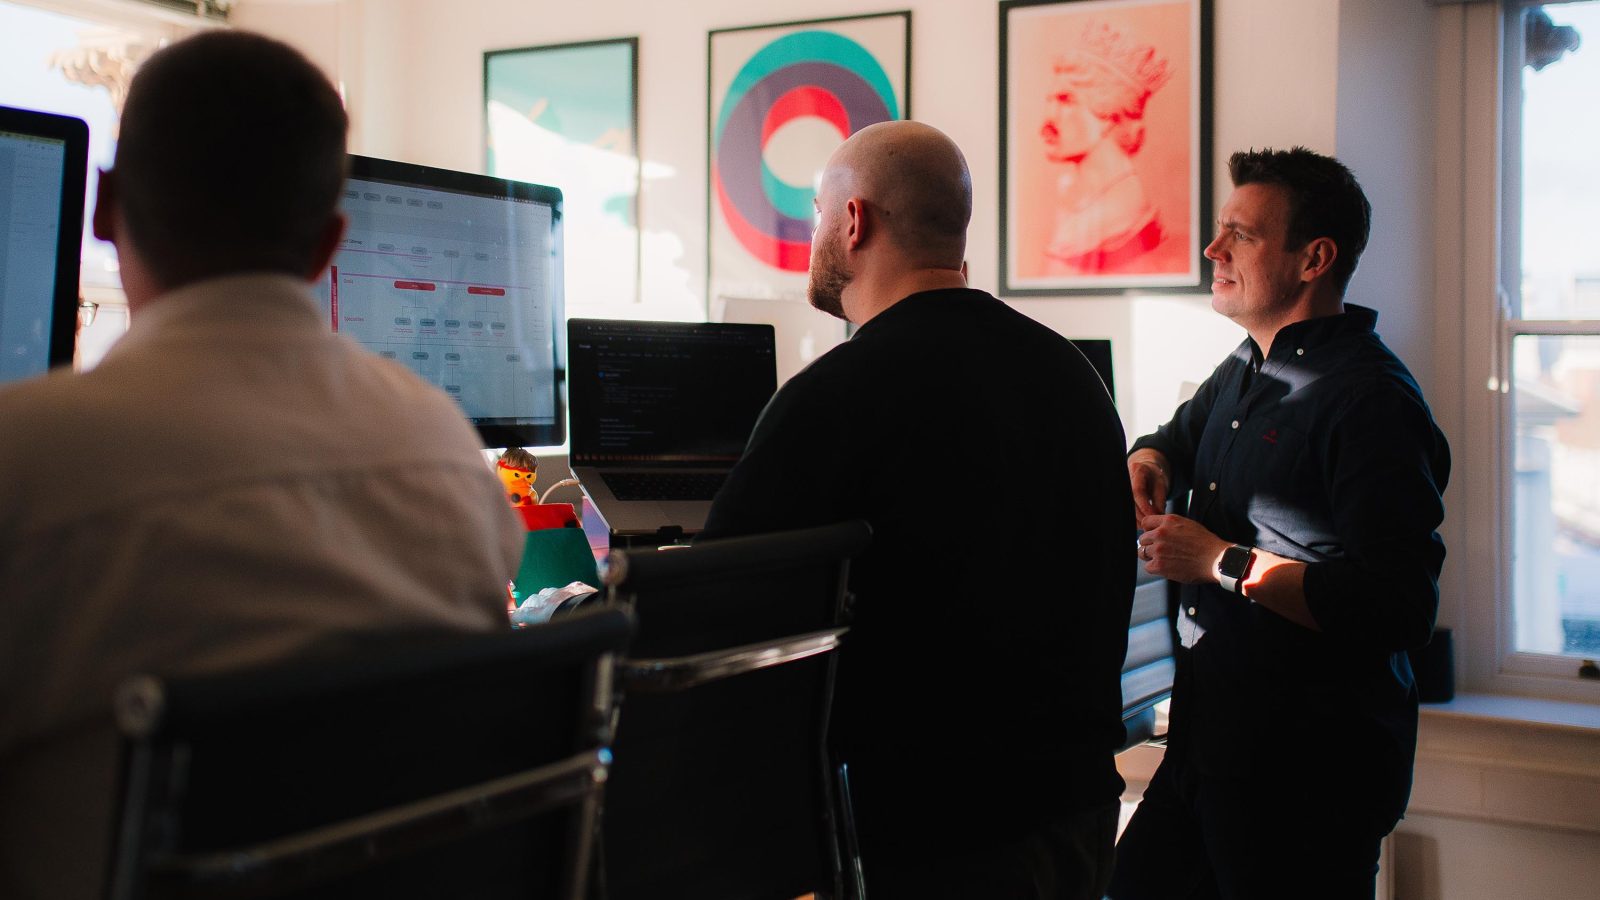 Three professionals in an office discussing brand design services in front of computer screens, with colorful artwork on the walls.